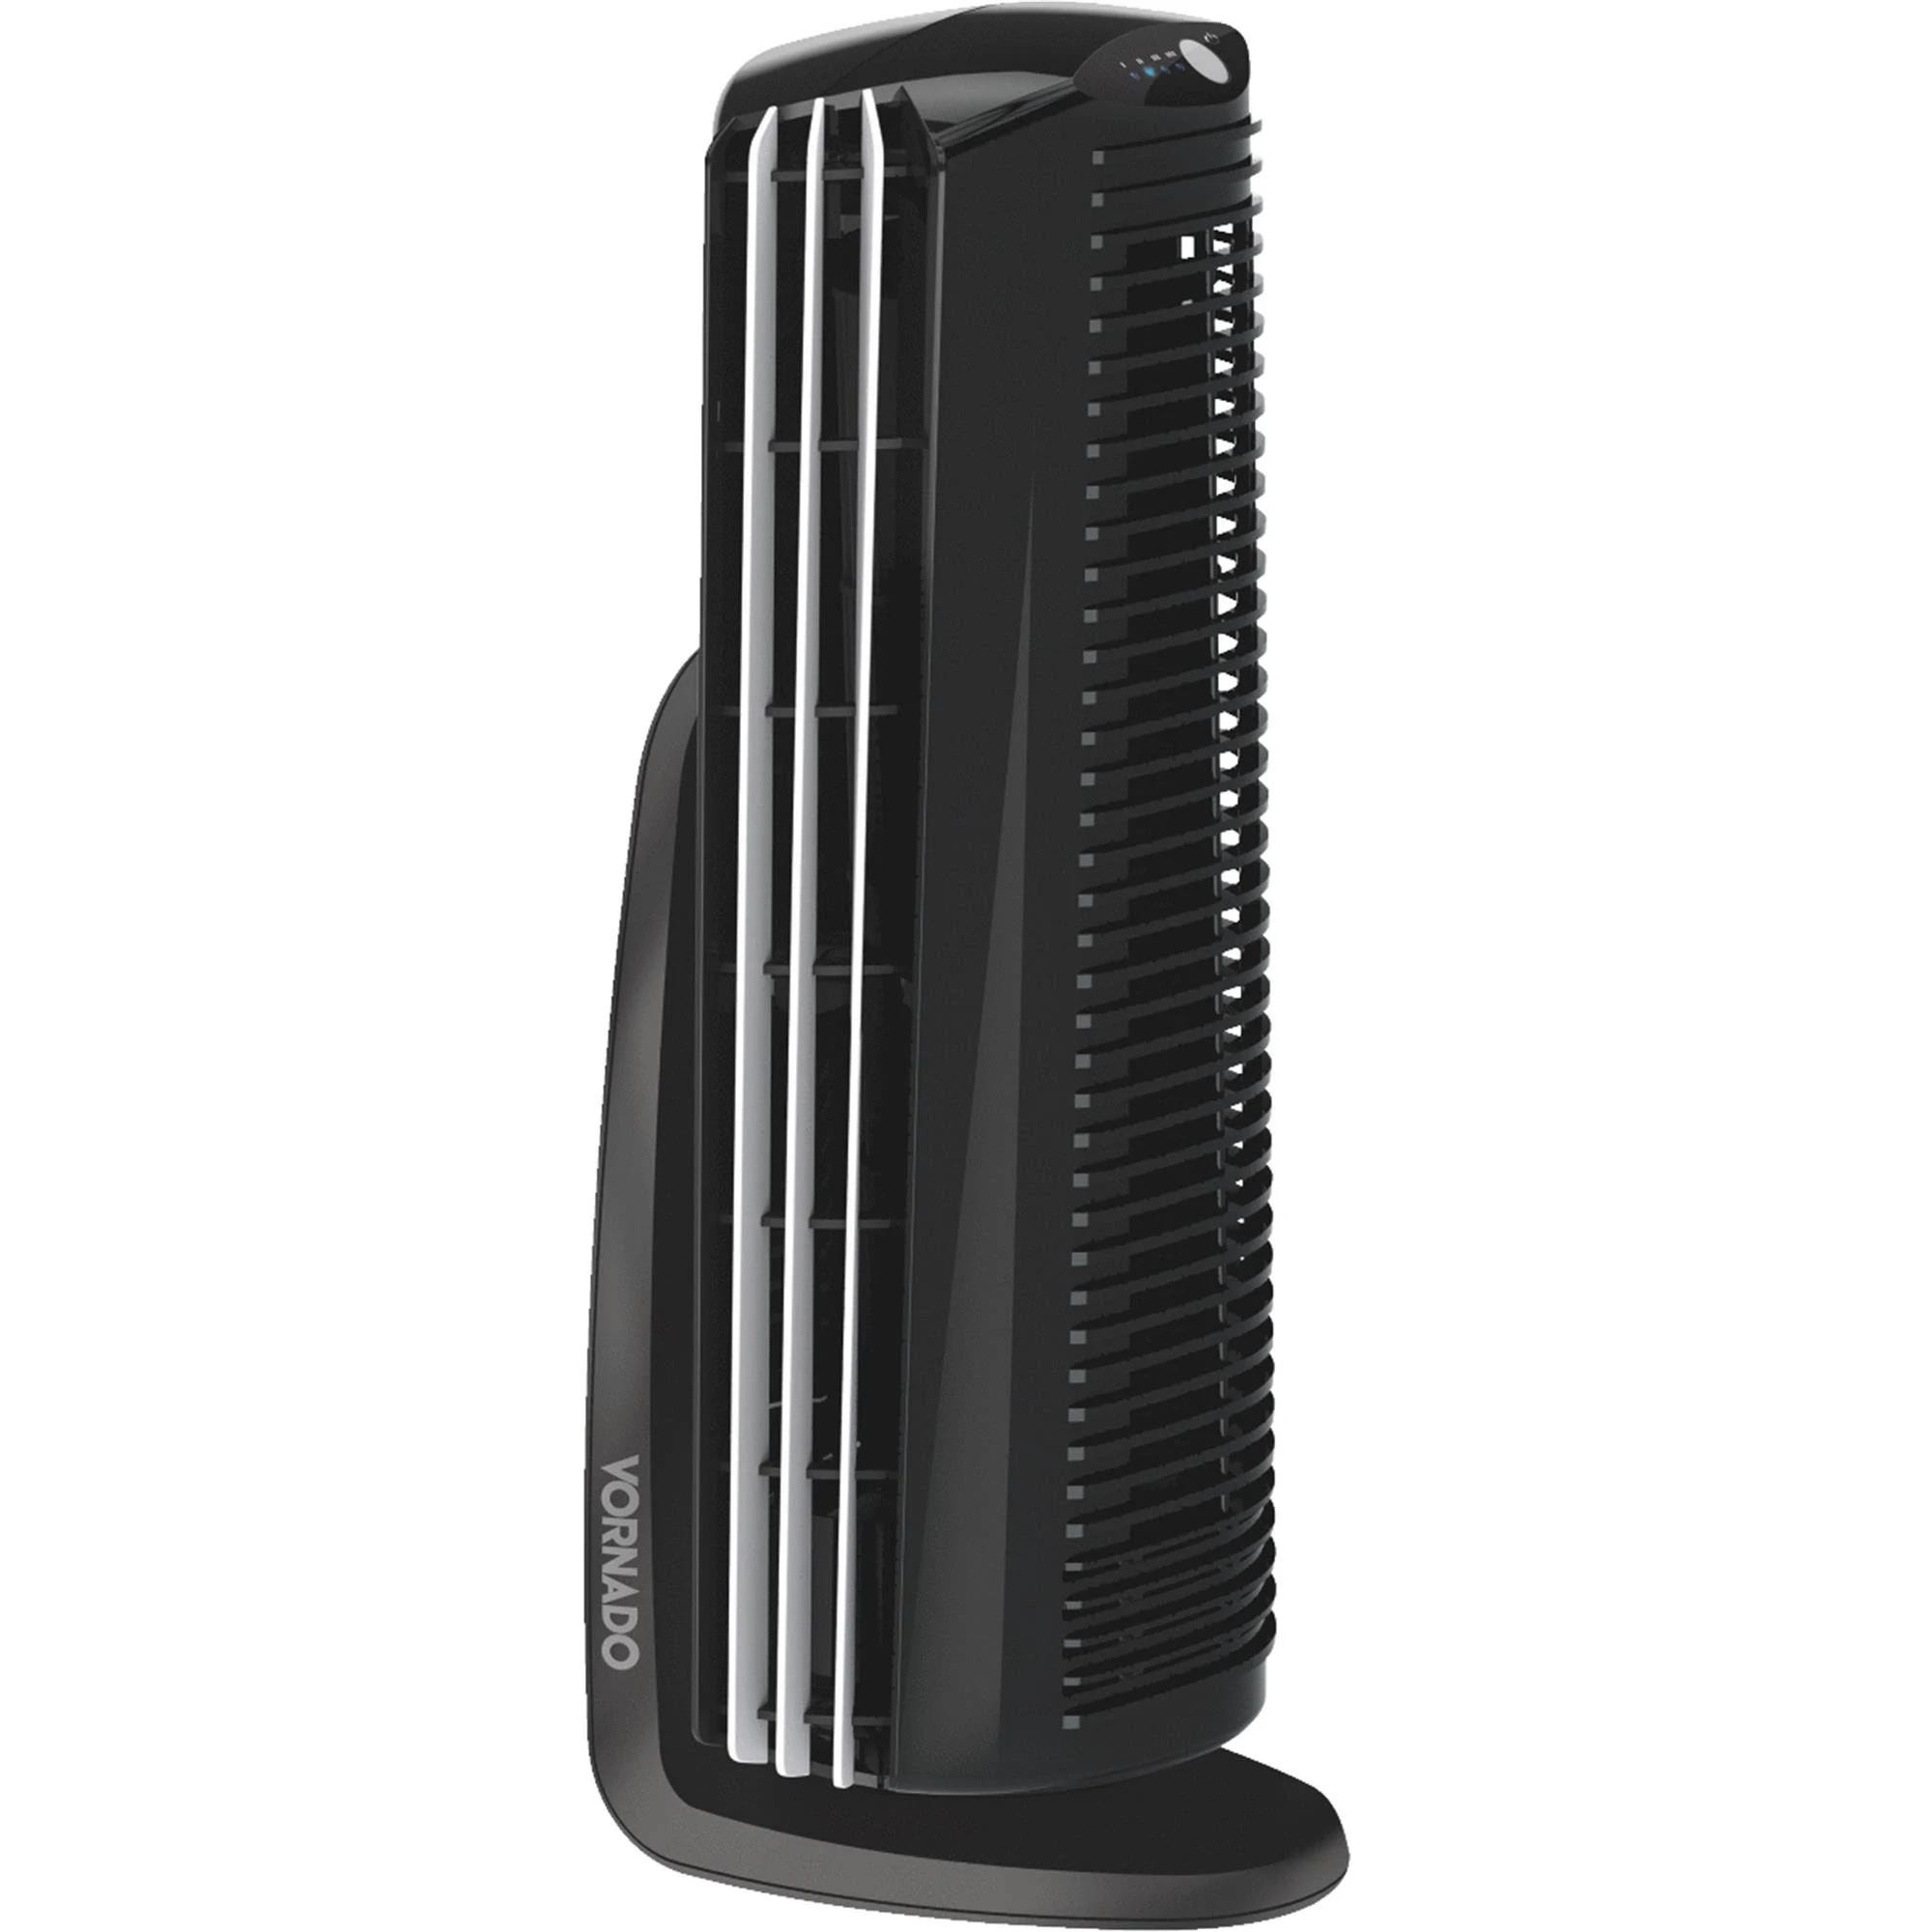 Vornado Duo Tower Air Circulator Fan for Small Rooms | Image